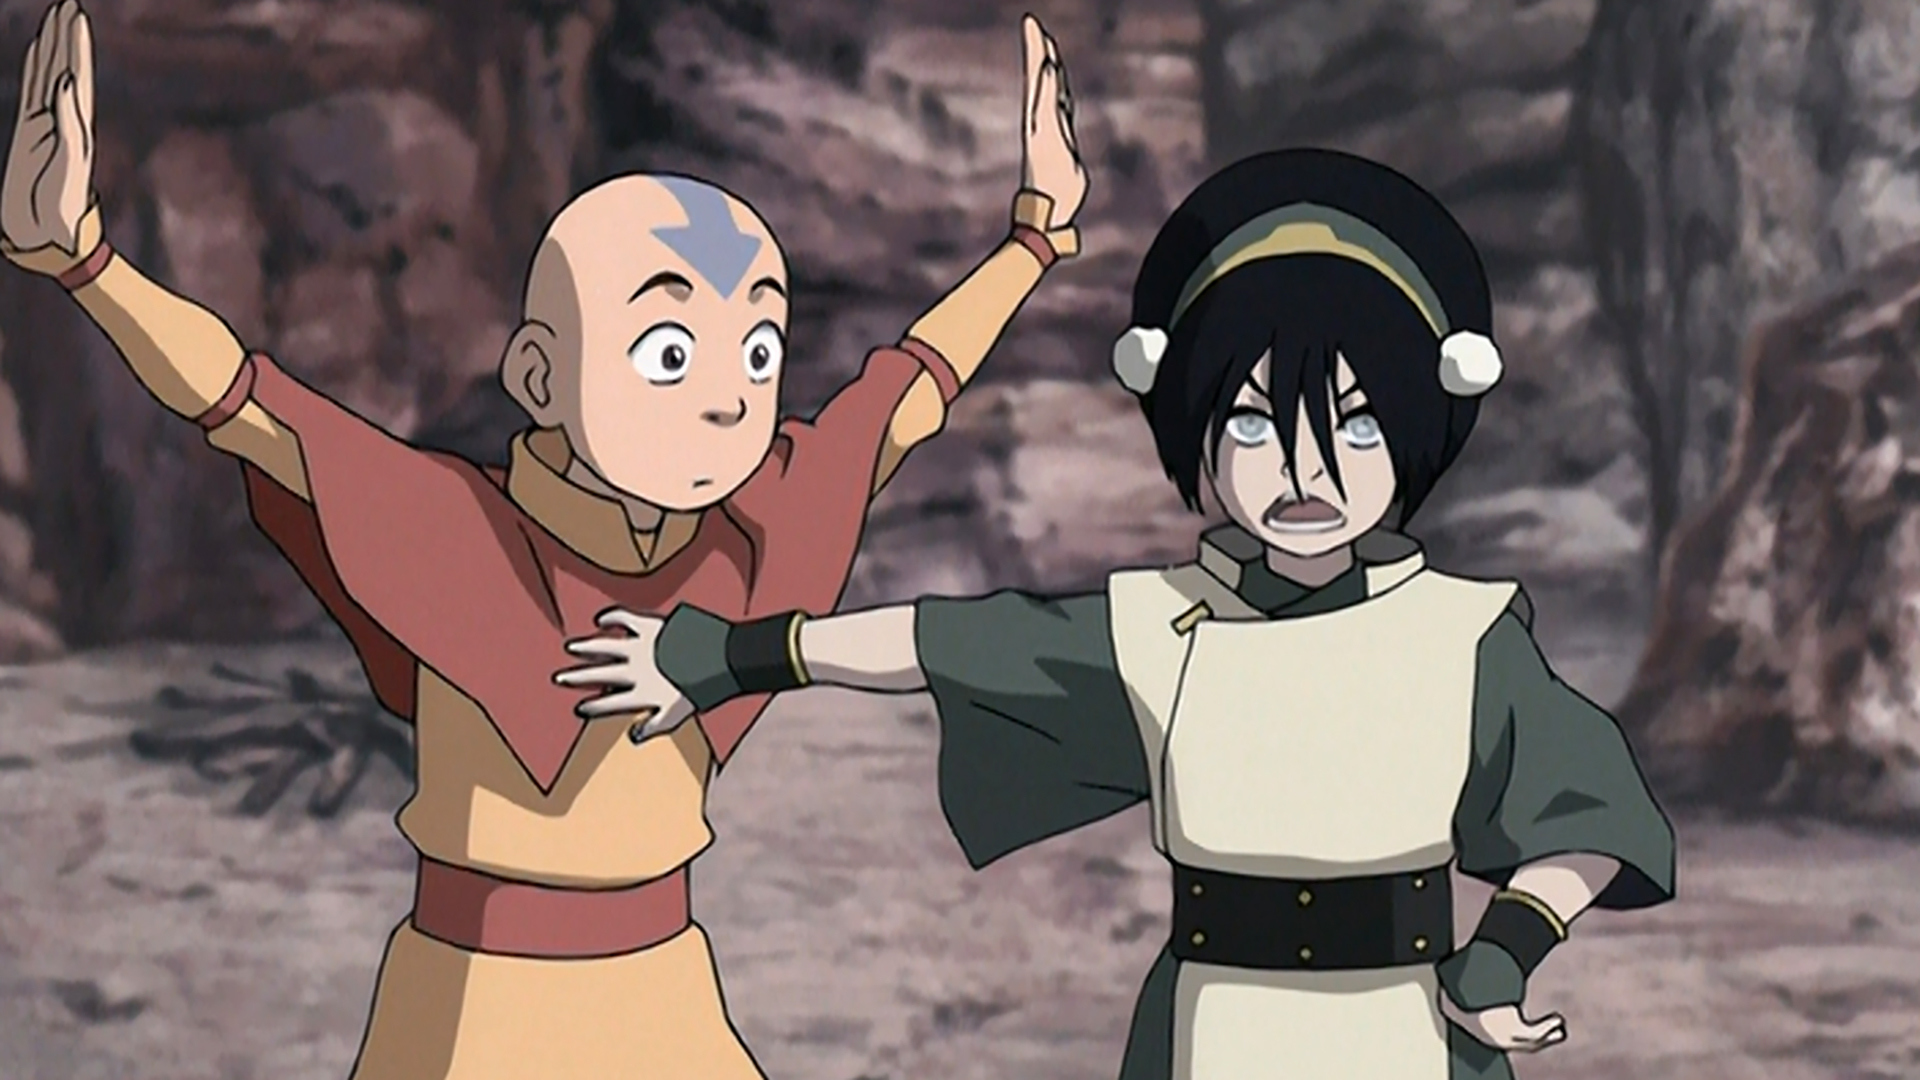 Avatar The Last Airbender S2  Episode 1 Part2  The Avatar State   YouTube